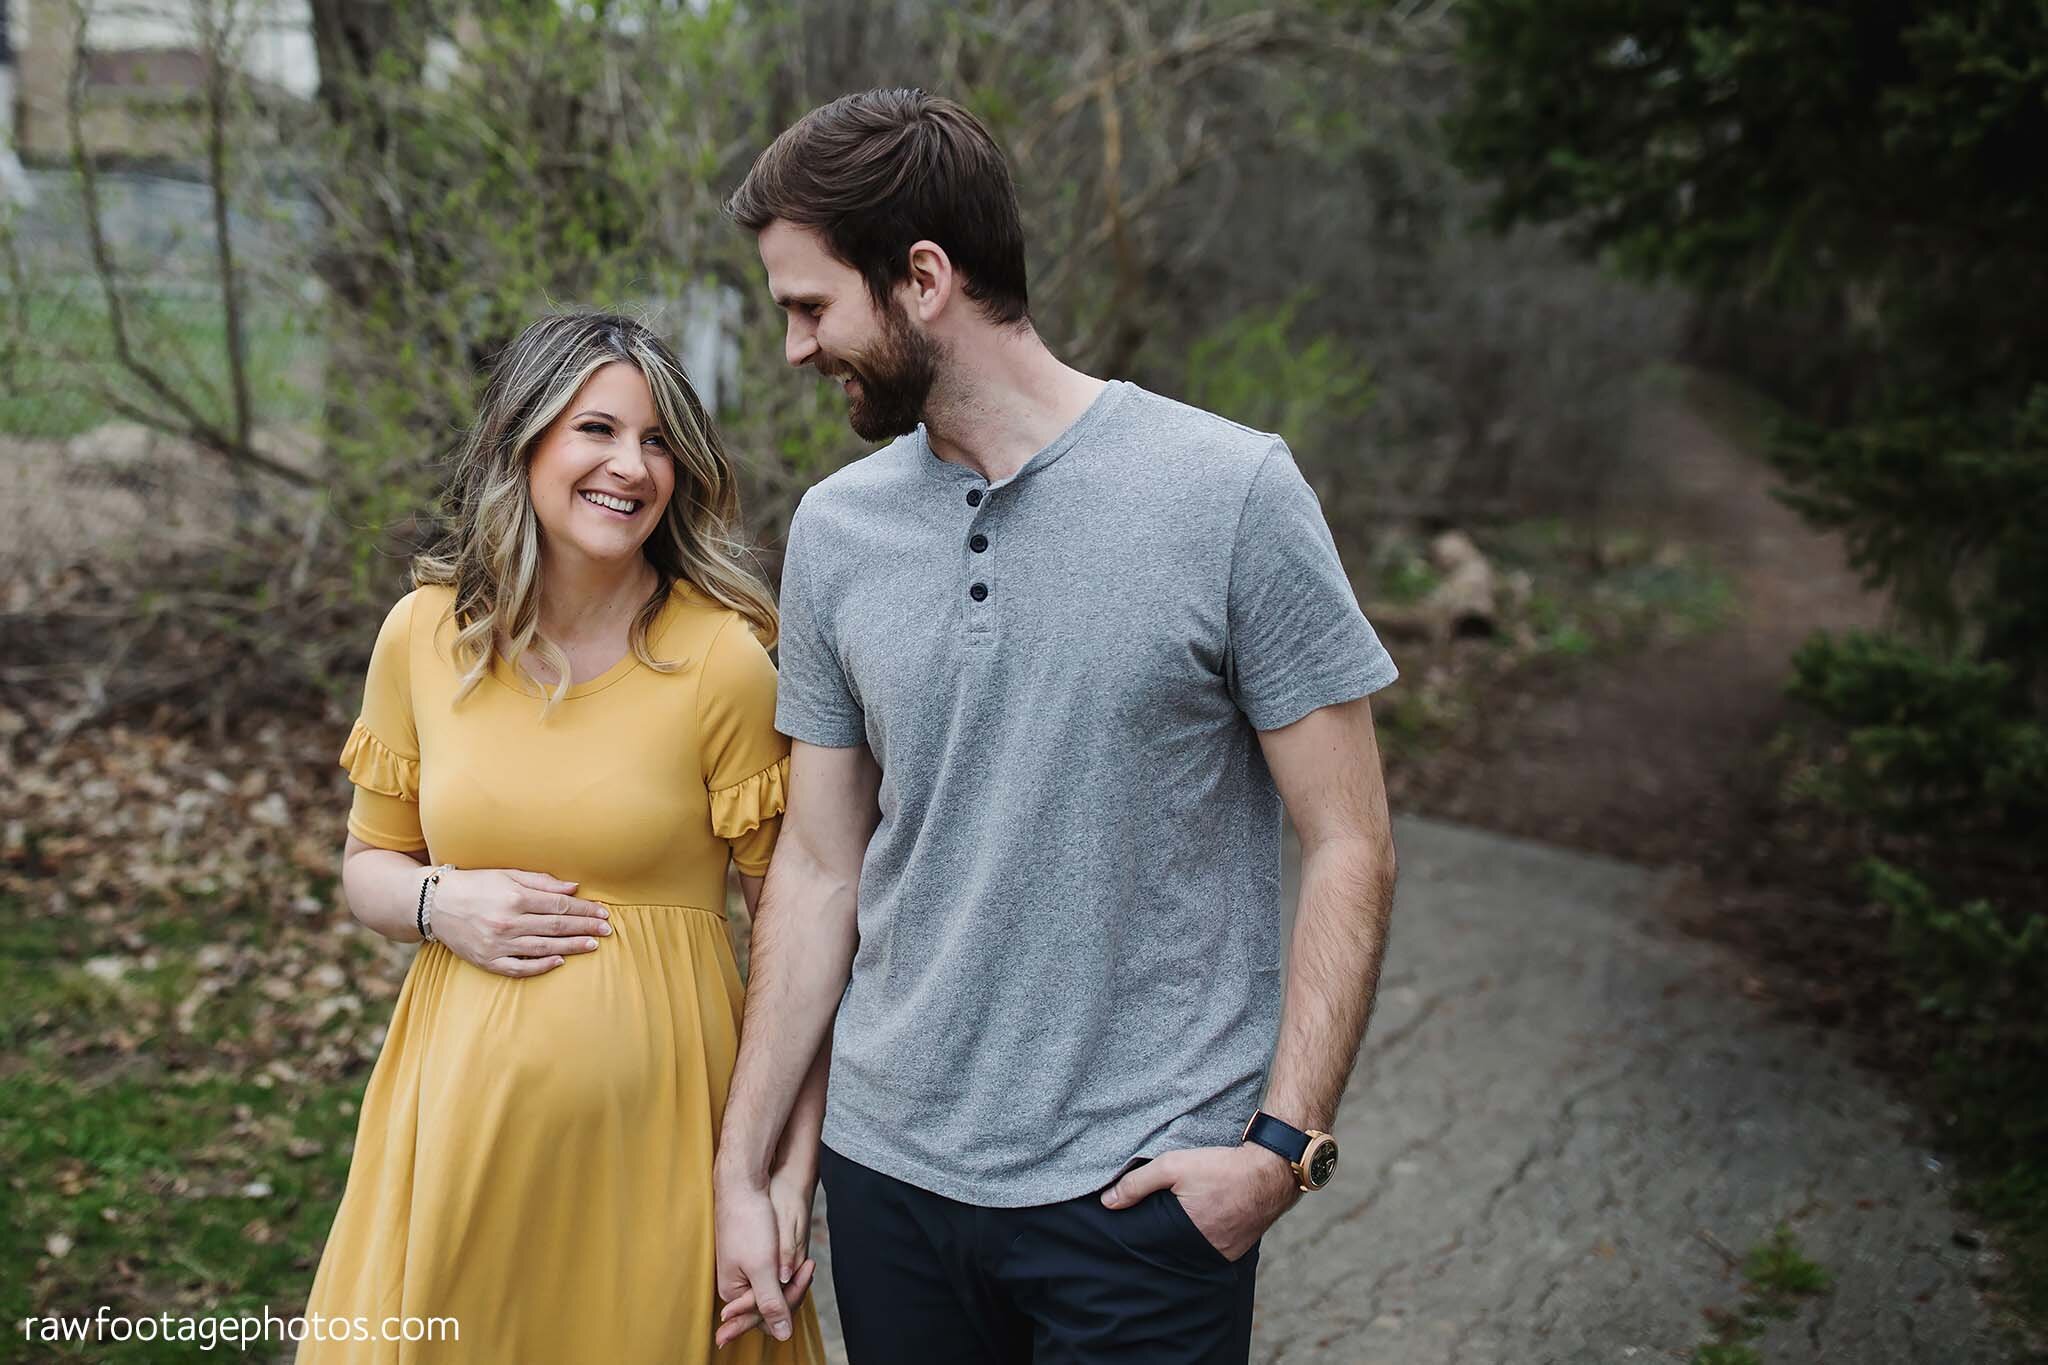 london_ontario_maternity_photographer-raw_footage_photography-in_home_lifestyle_maternity-forest_maternity_session-yellow_maternity_dress_026.jpg